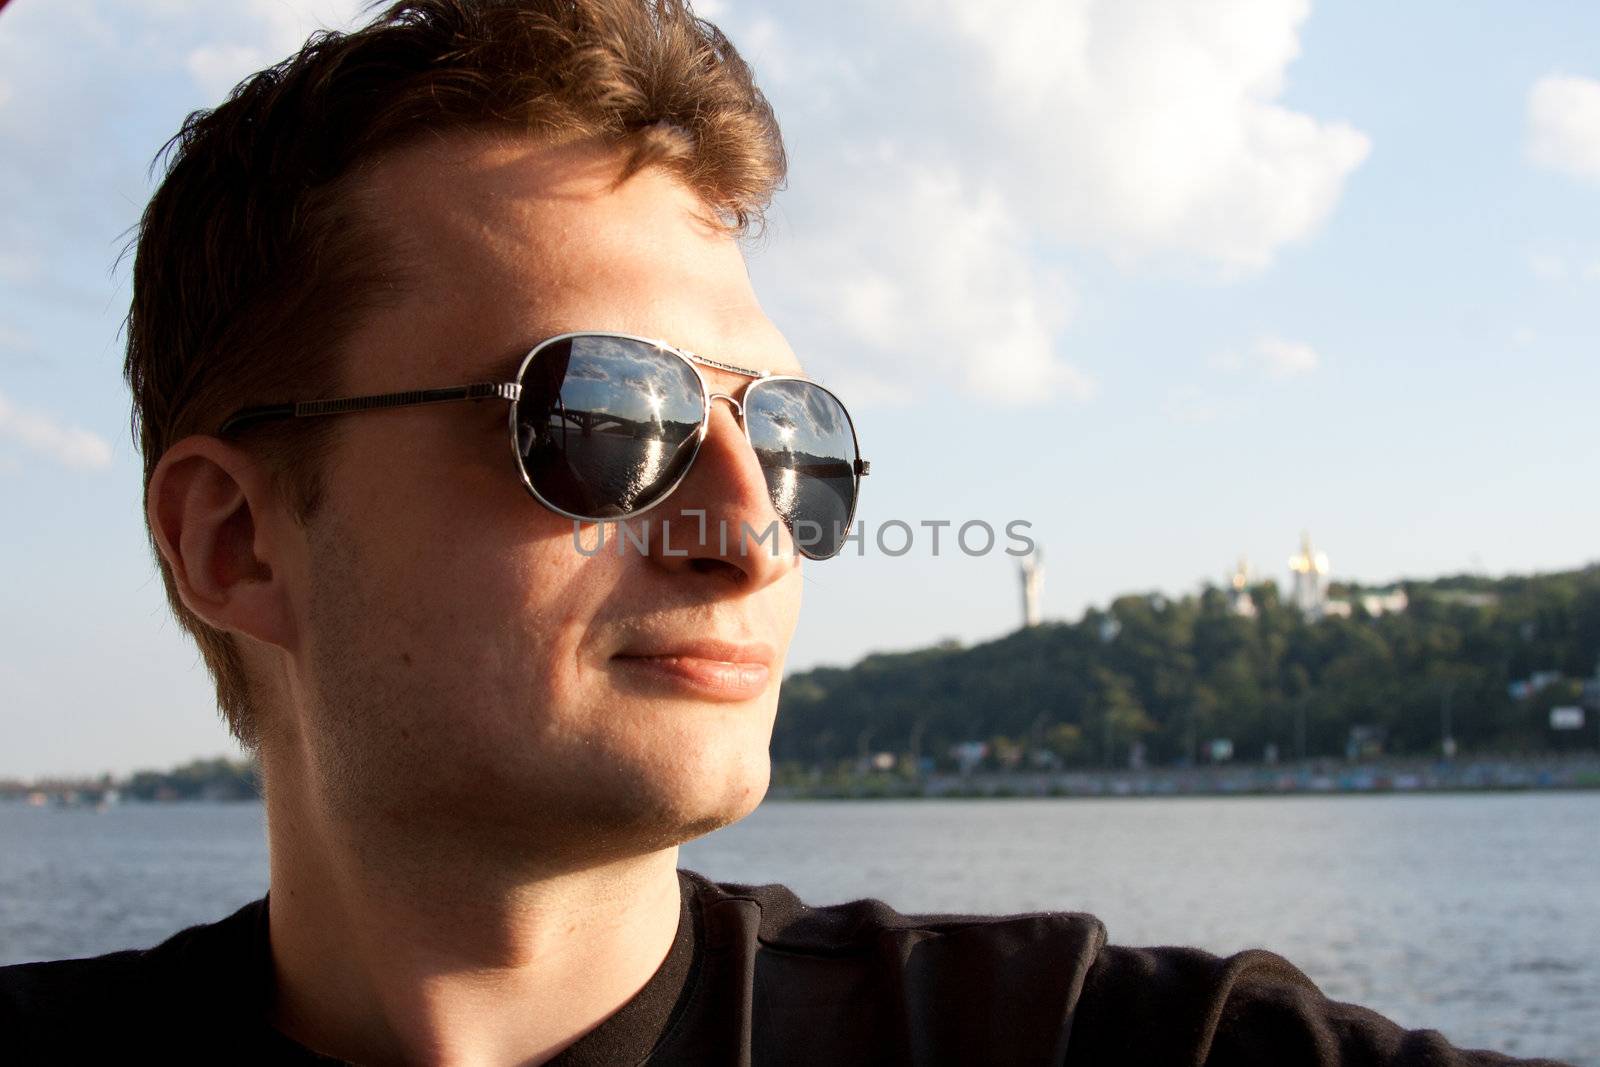 The guy in sunglasses against the background of sky and water